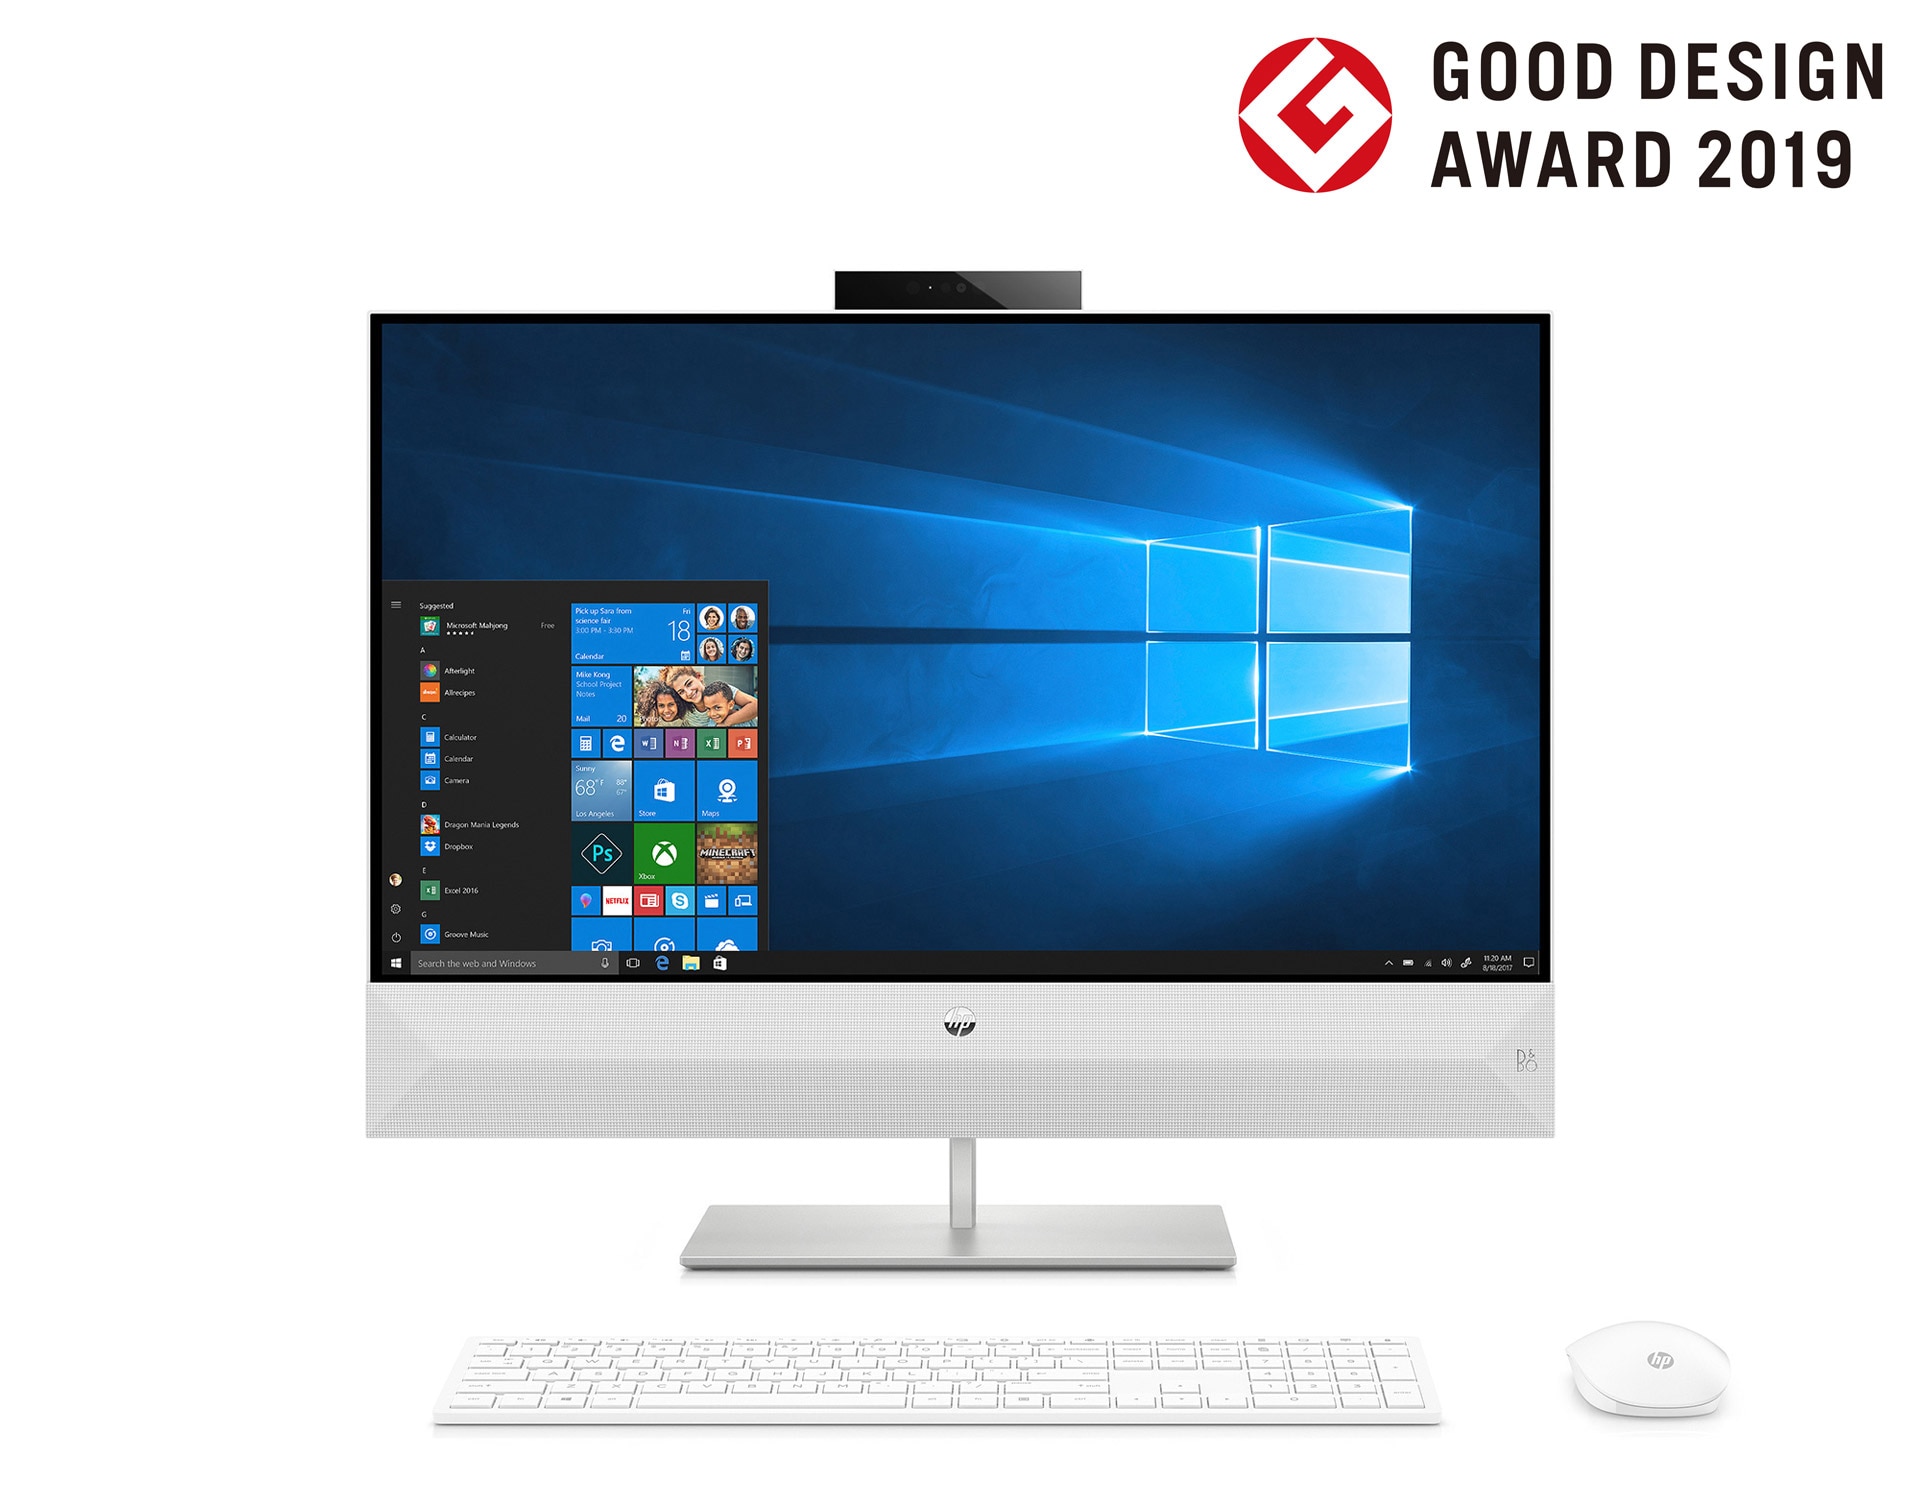 HP Pavilion All-in-One 27